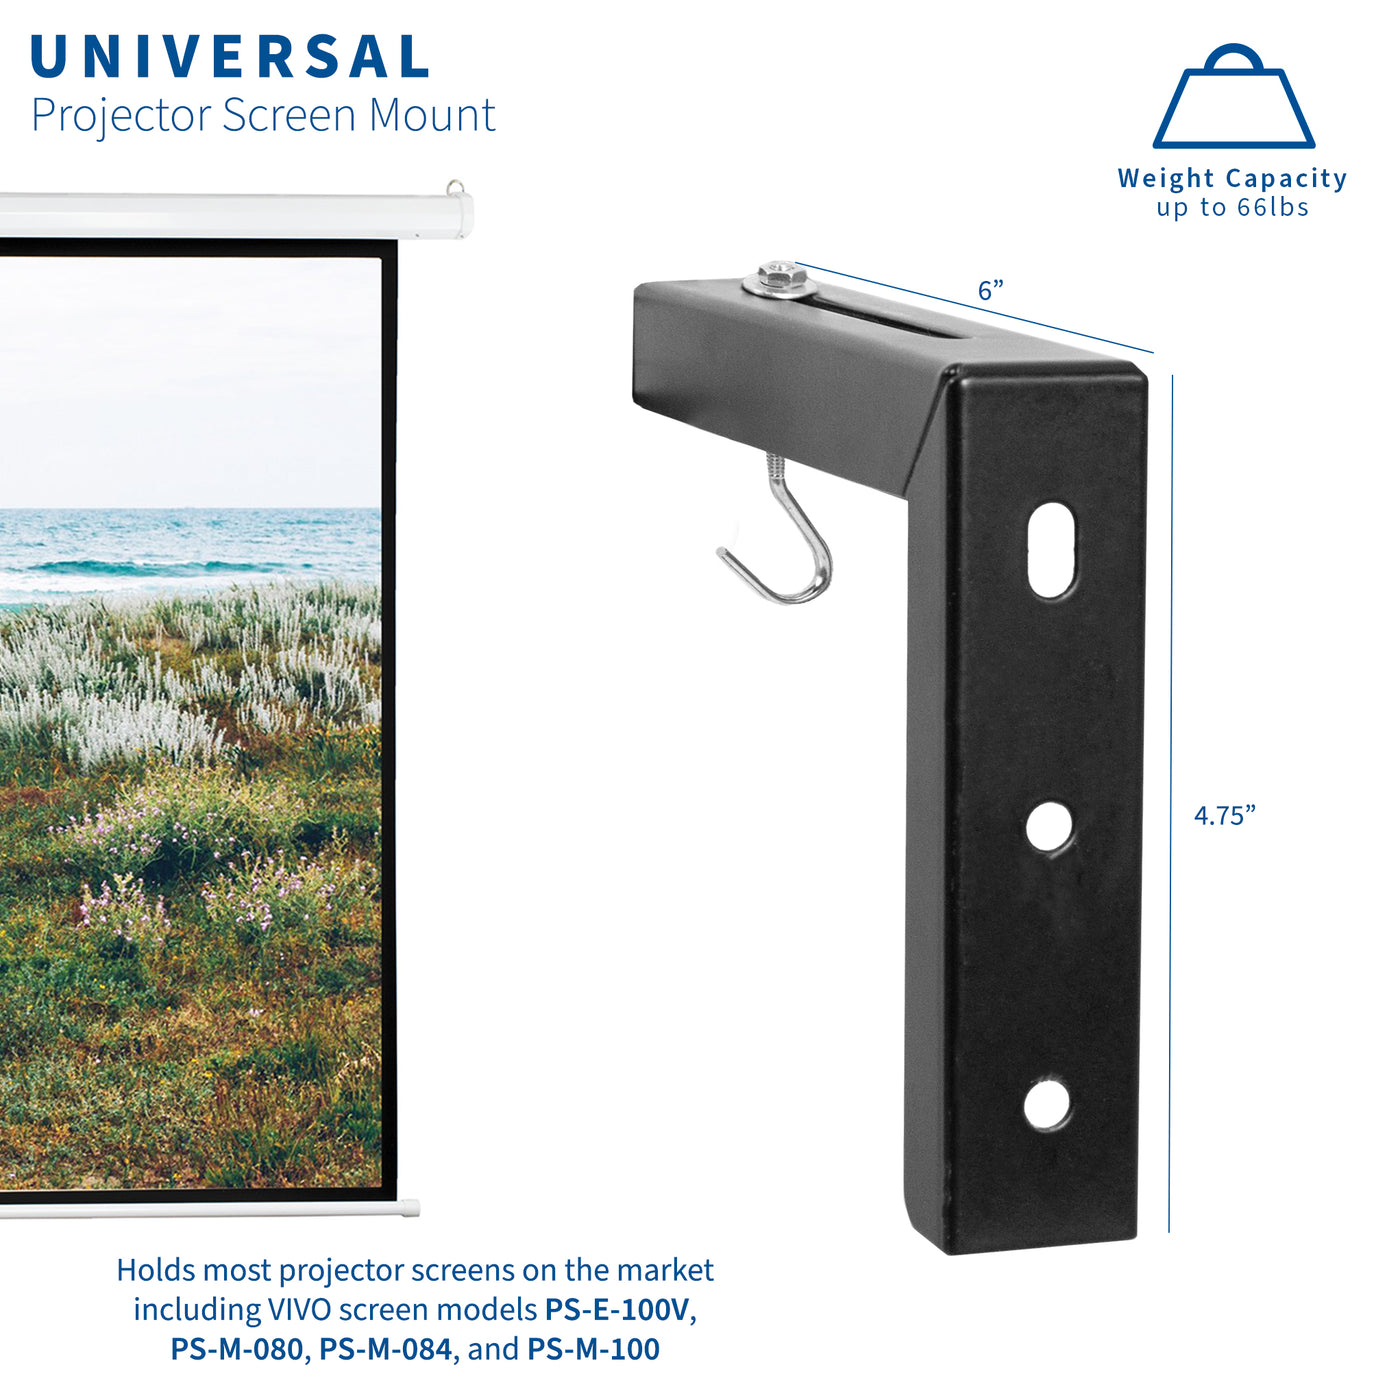 Universal projector screen mount with a hefty weight capacity.